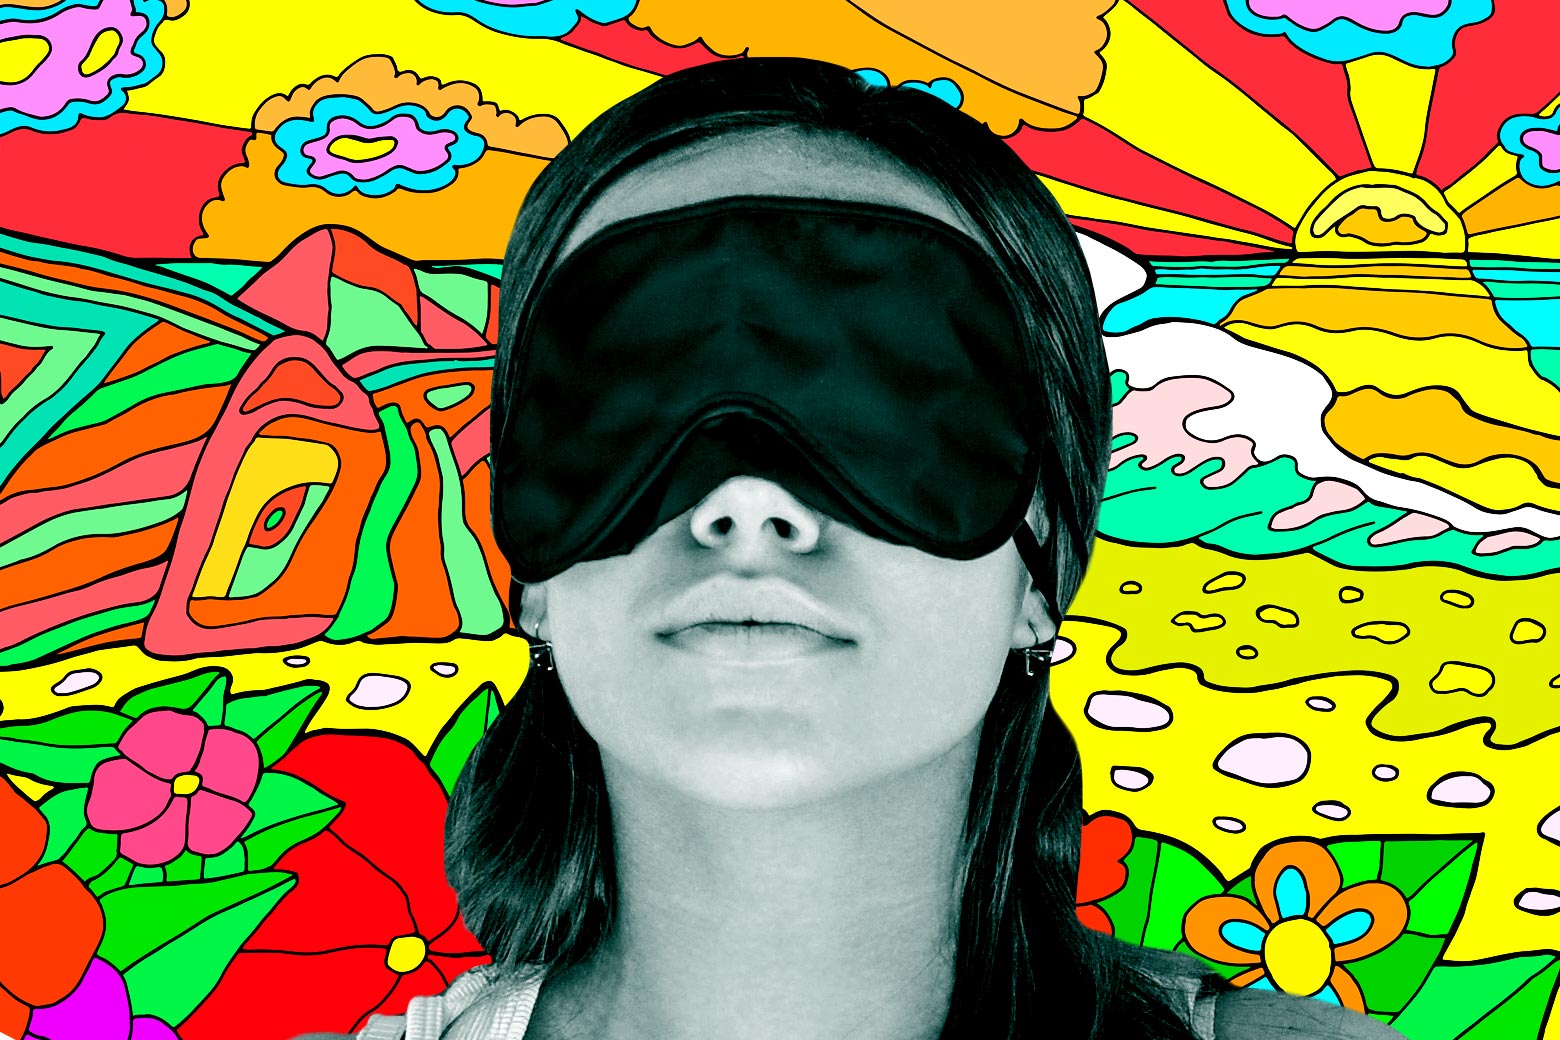 Woman wearing a sleeping mask, with a psychedelic landscape in the background.